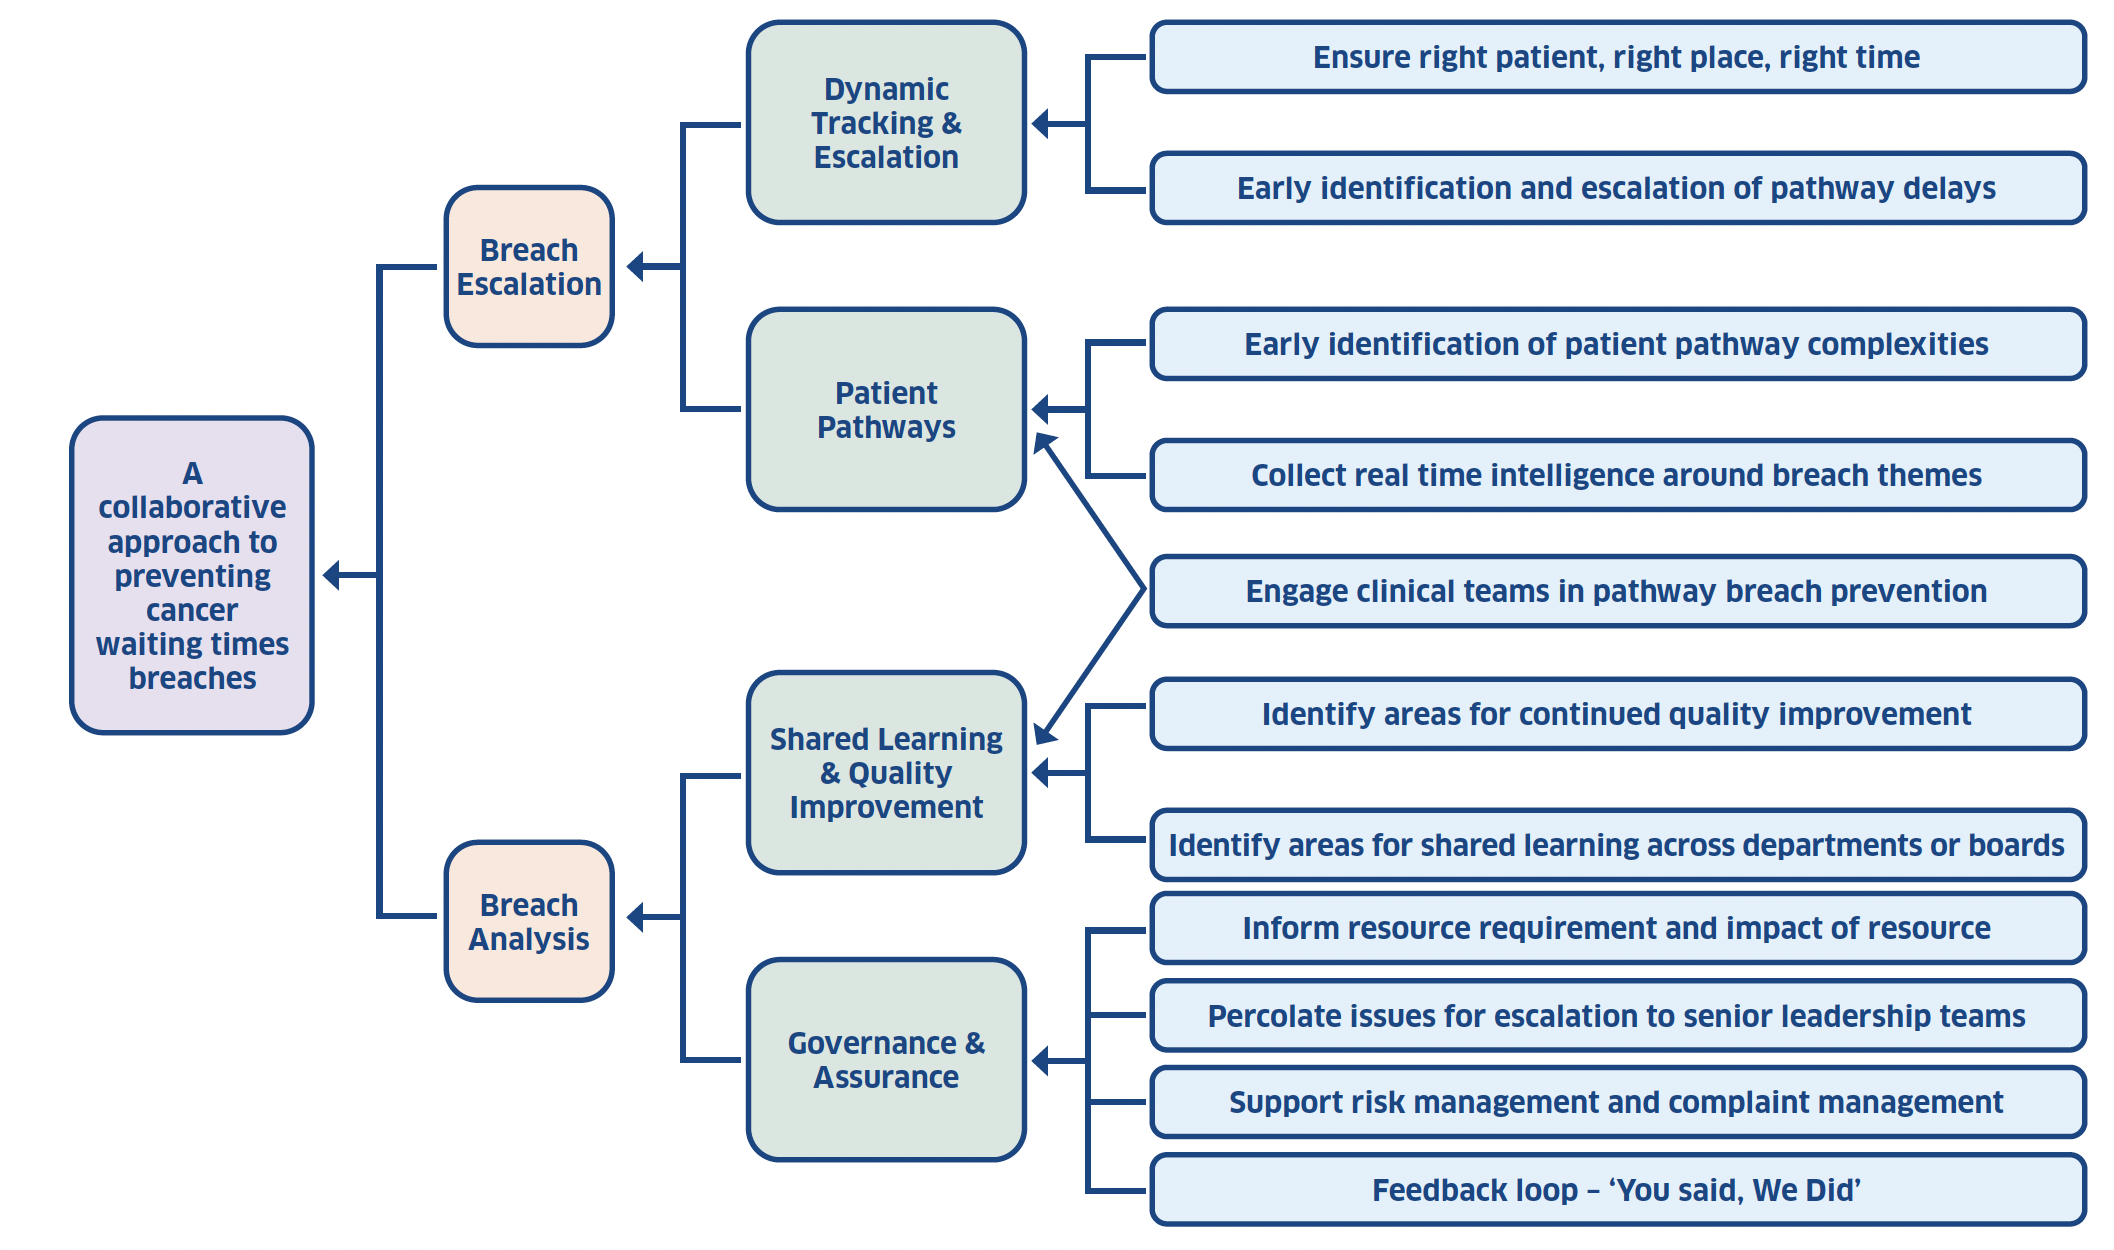 Driver diagram mapping the core objectives of the outlined EBA SOP in creating a uniform and collaborative approach to cancer waiting times breach analysis across all health boards in Scotland